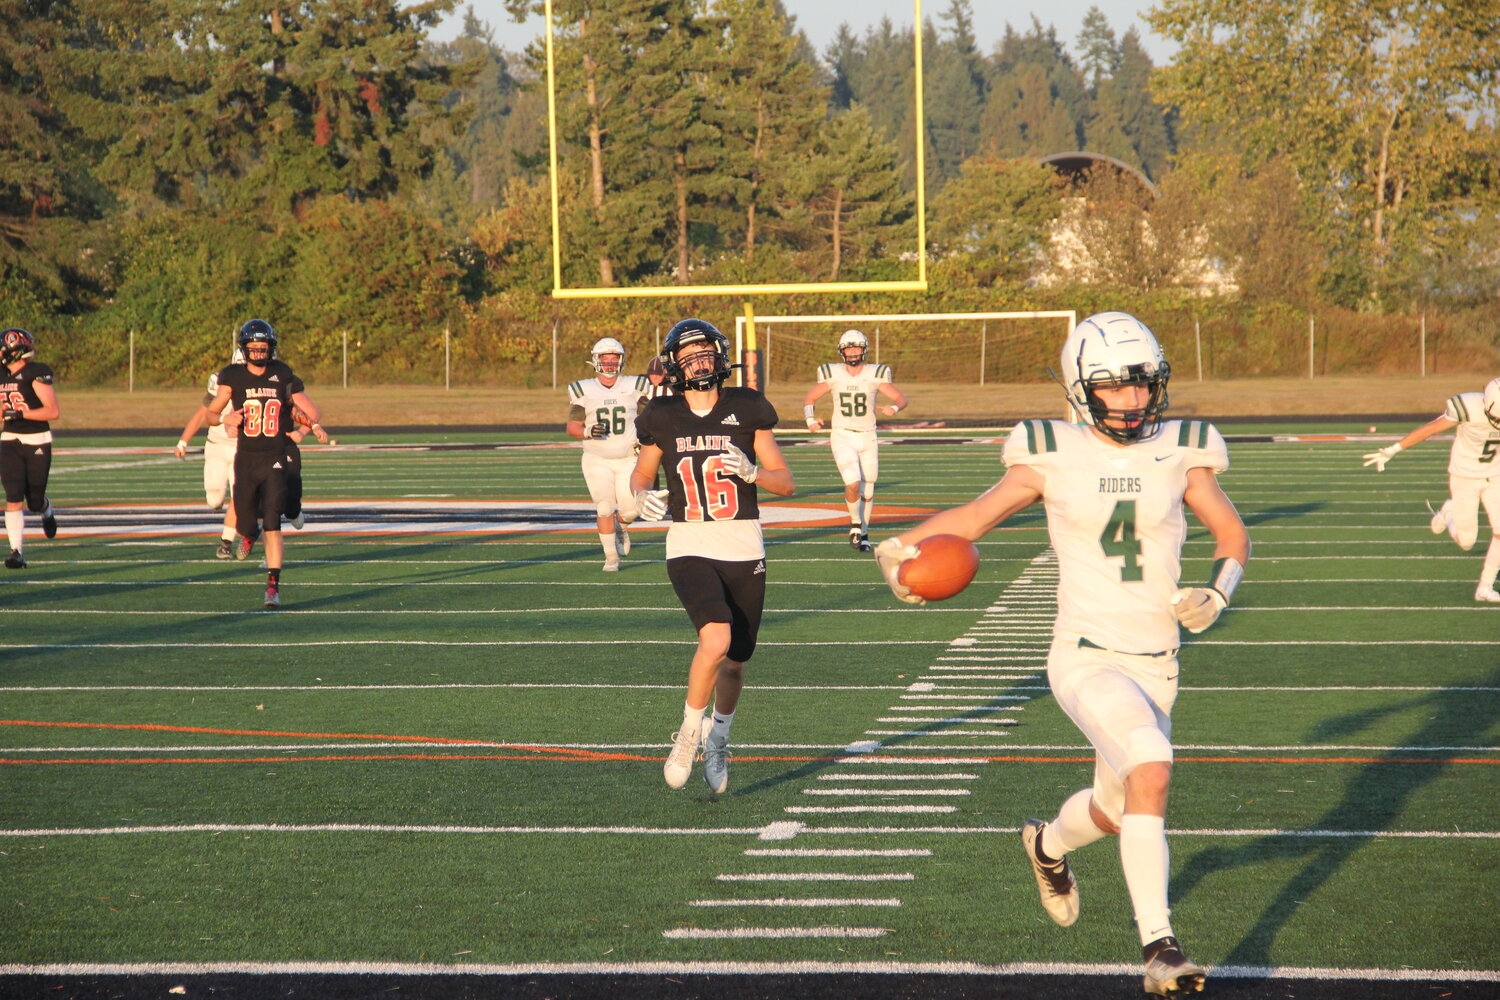 Port Angeles junior wide receiver Blake Sohlberg runs past Blaine senior defensive back Jesse Deming on a long touchdown pass in the first quarter of Port Angeles’ 44-21 win over Blaine on September 1.